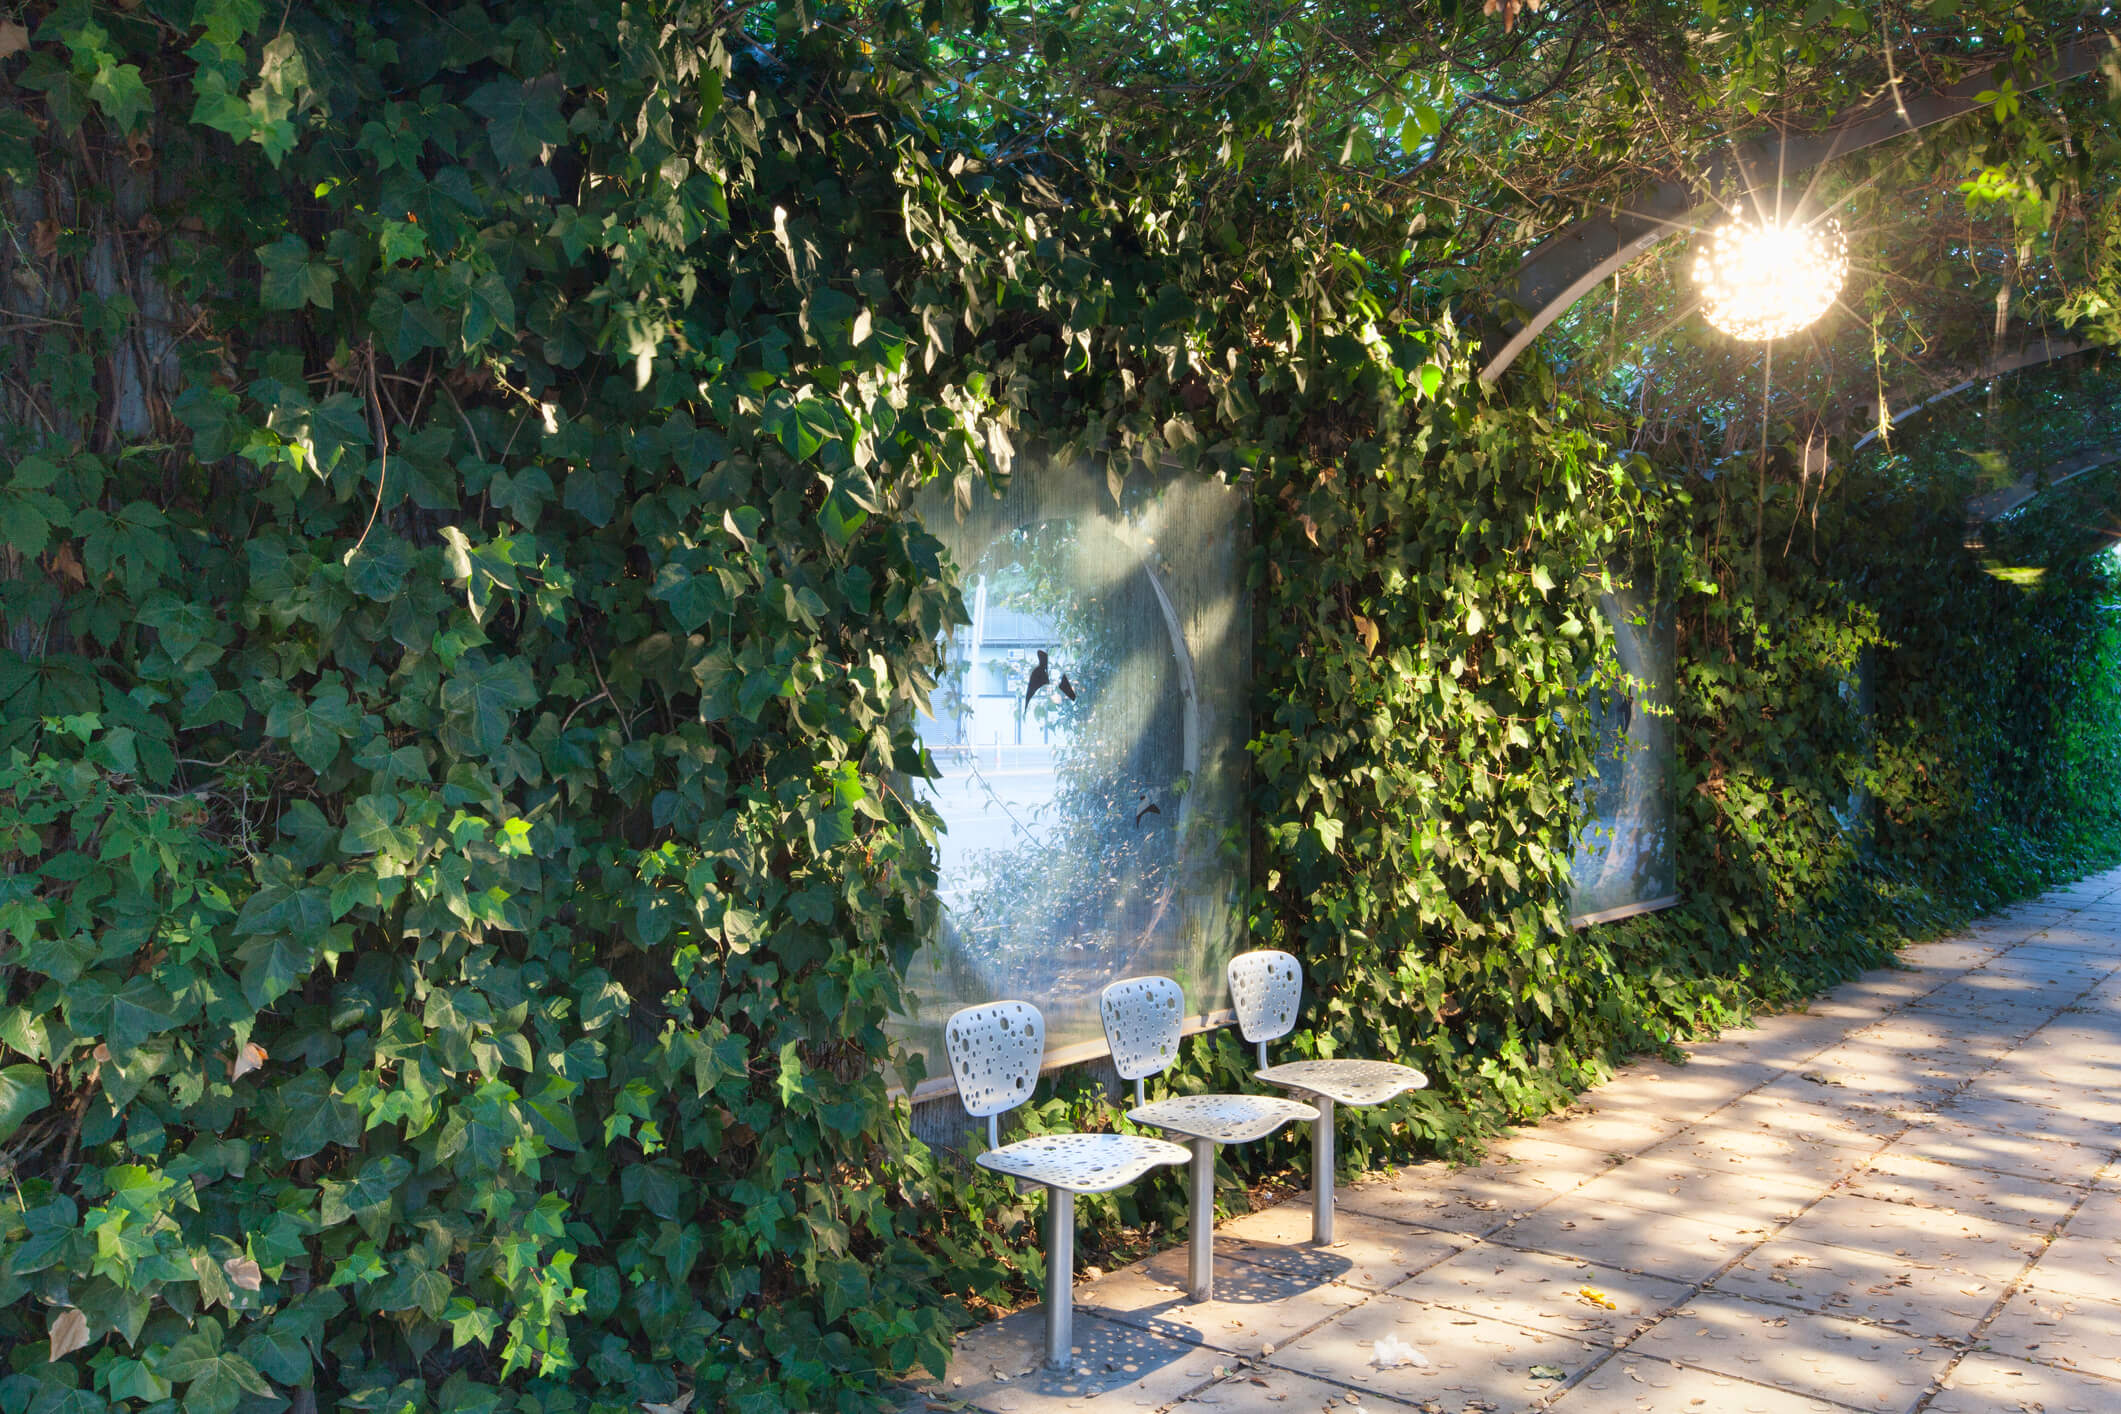 Three metal chairs sit against a wall covered in vines in Barcelona